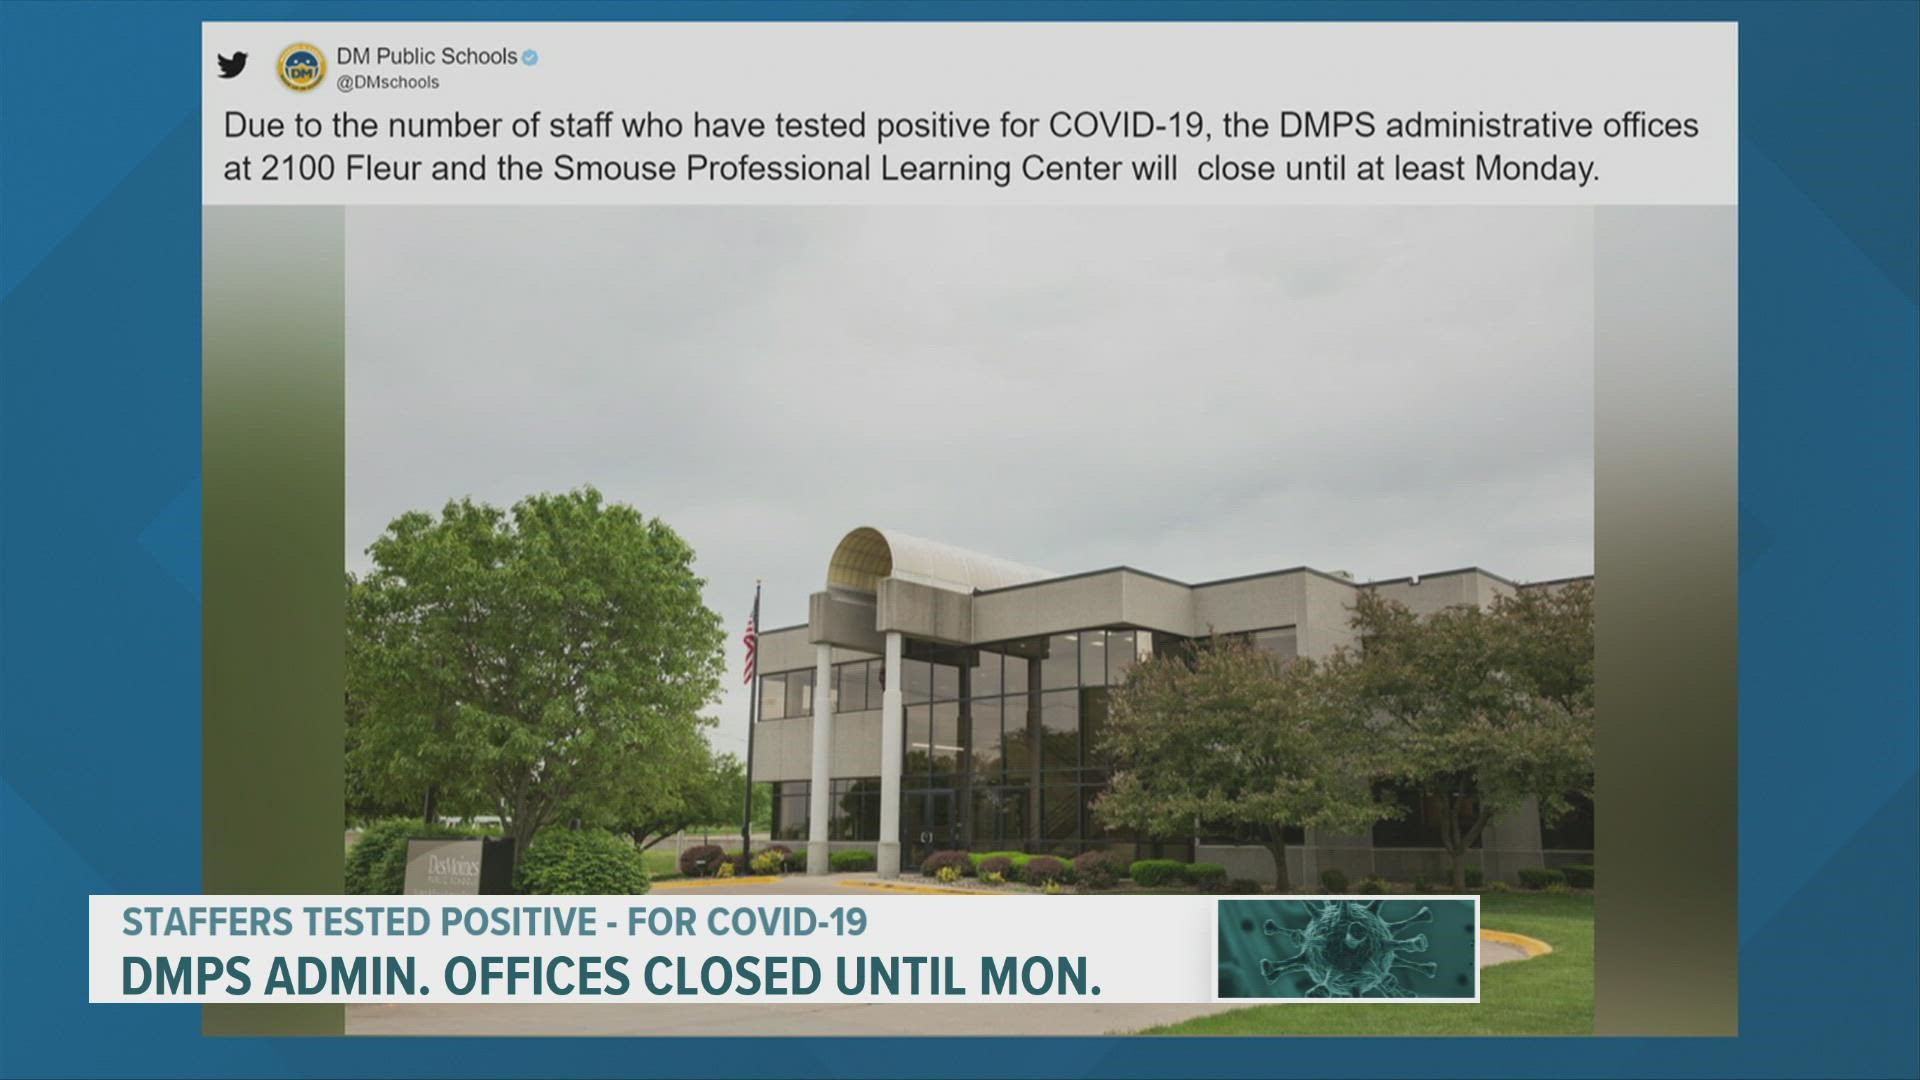 A tweet from Des Moines Public Schools says the offices at 2100 Fleur and the Smouse Professional Learning Center will be closed "until at least Monday."